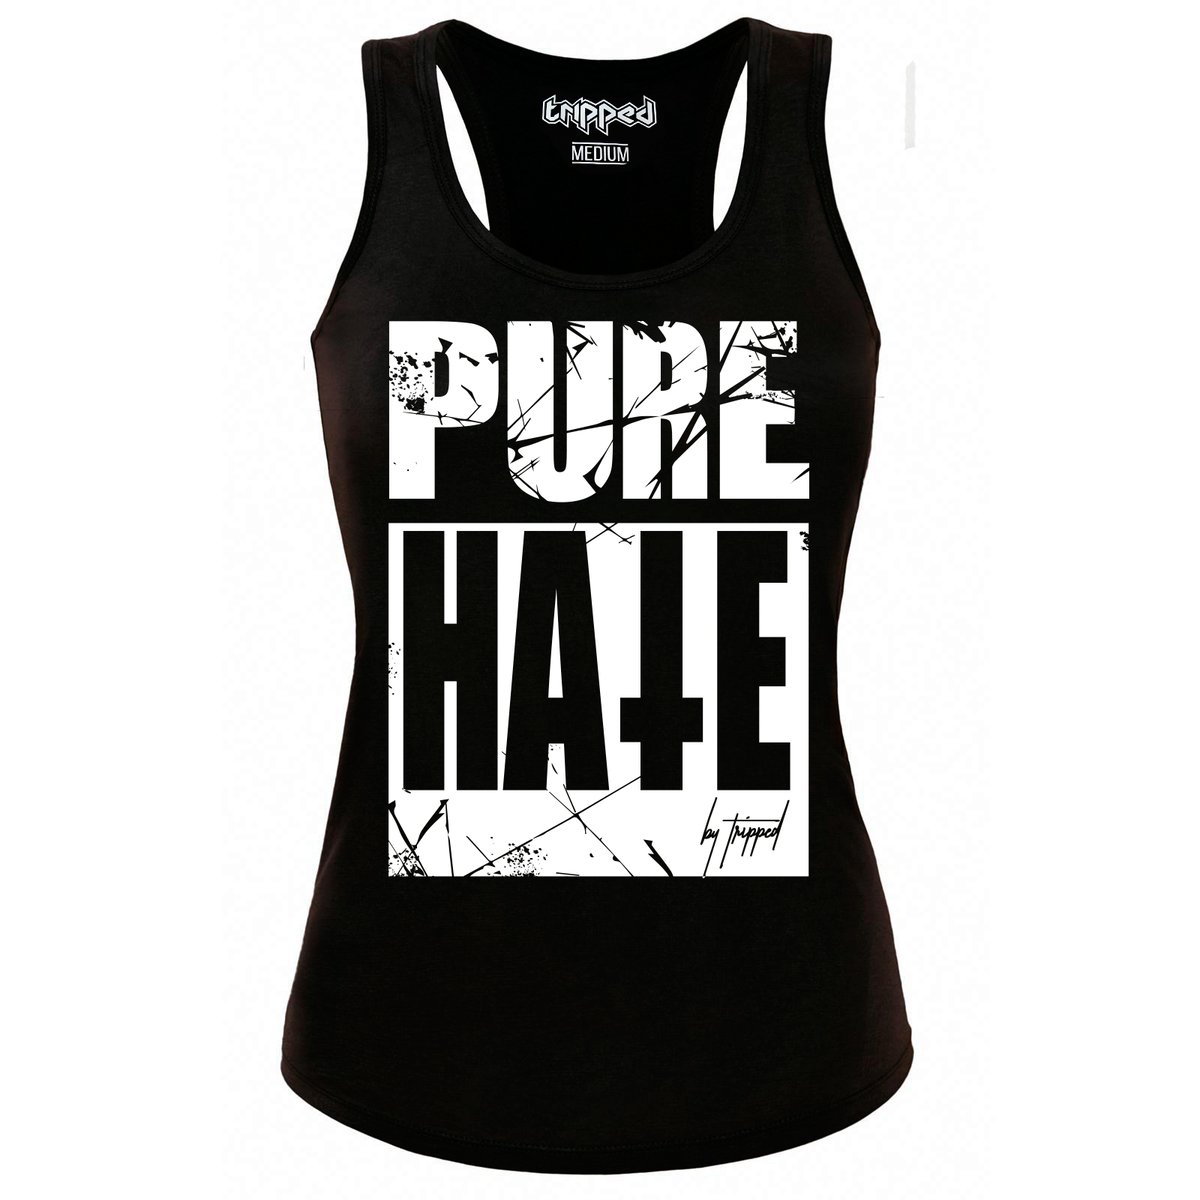 Image of Pure Hate Tank Top shirt by Tripped - Black - Girly